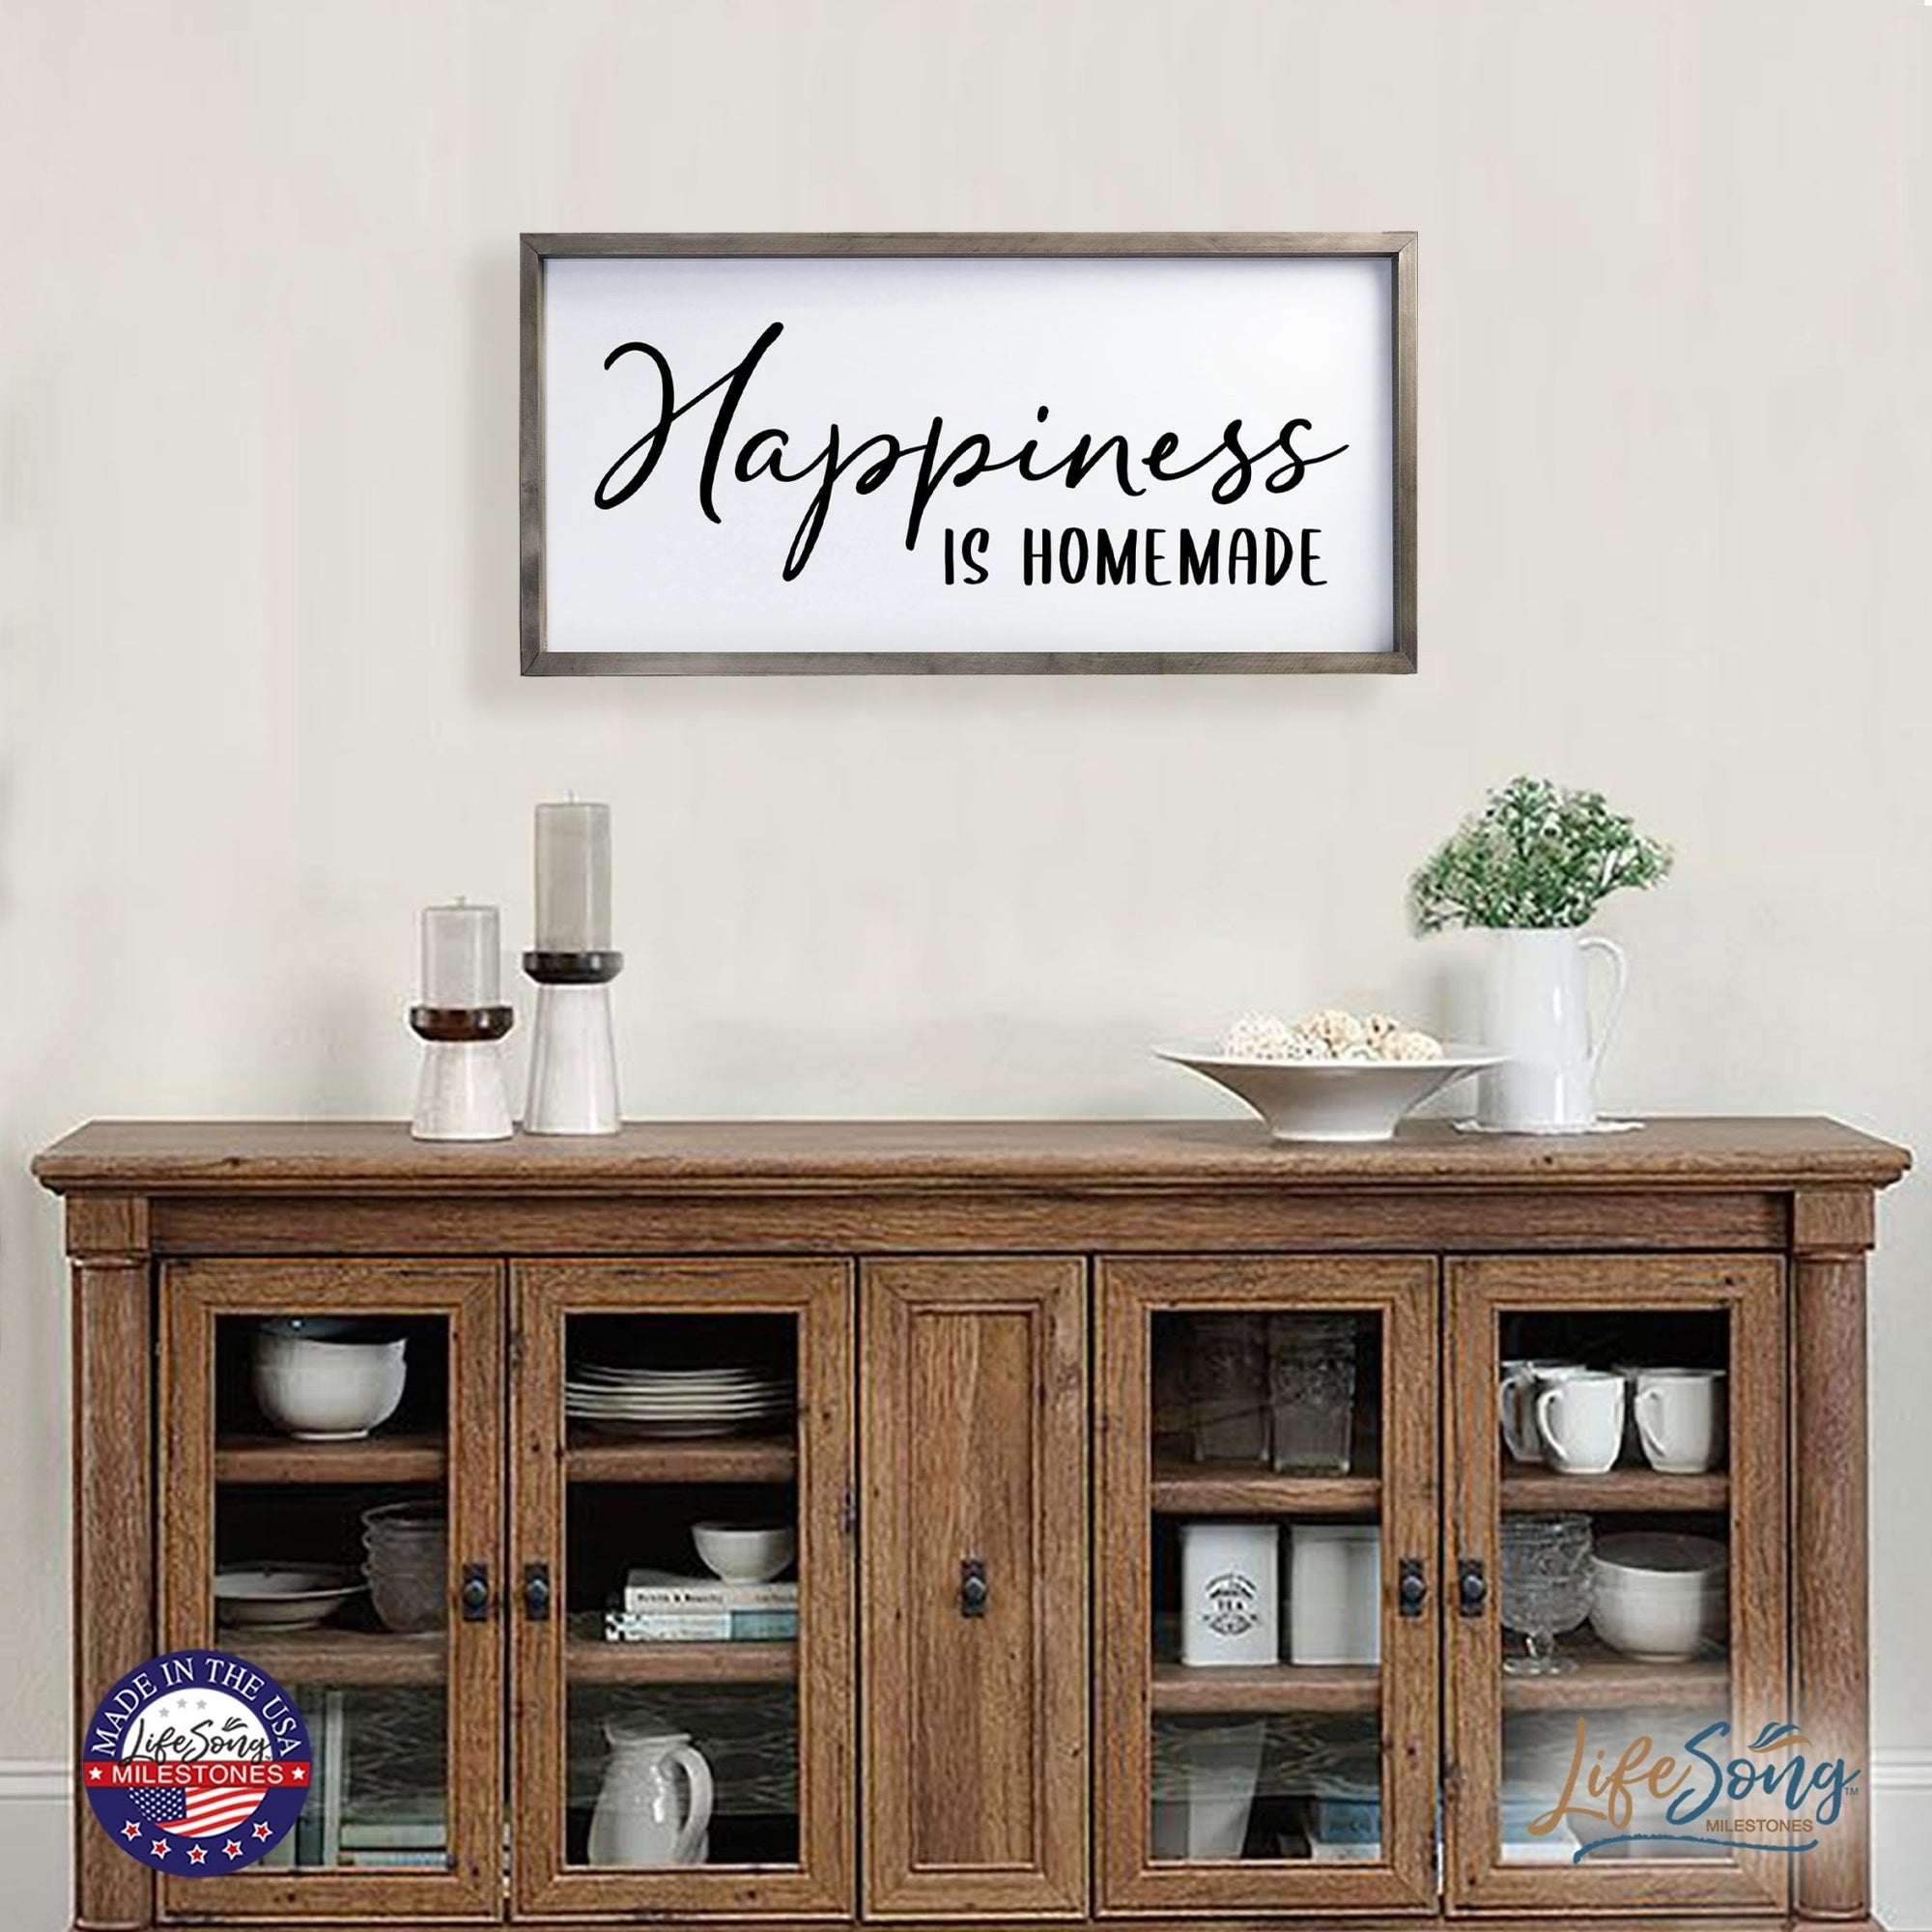 Large Family Wall Decor Quote Sign For Home 18 x 36 - Happiness Is Homemade - LifeSong Milestones